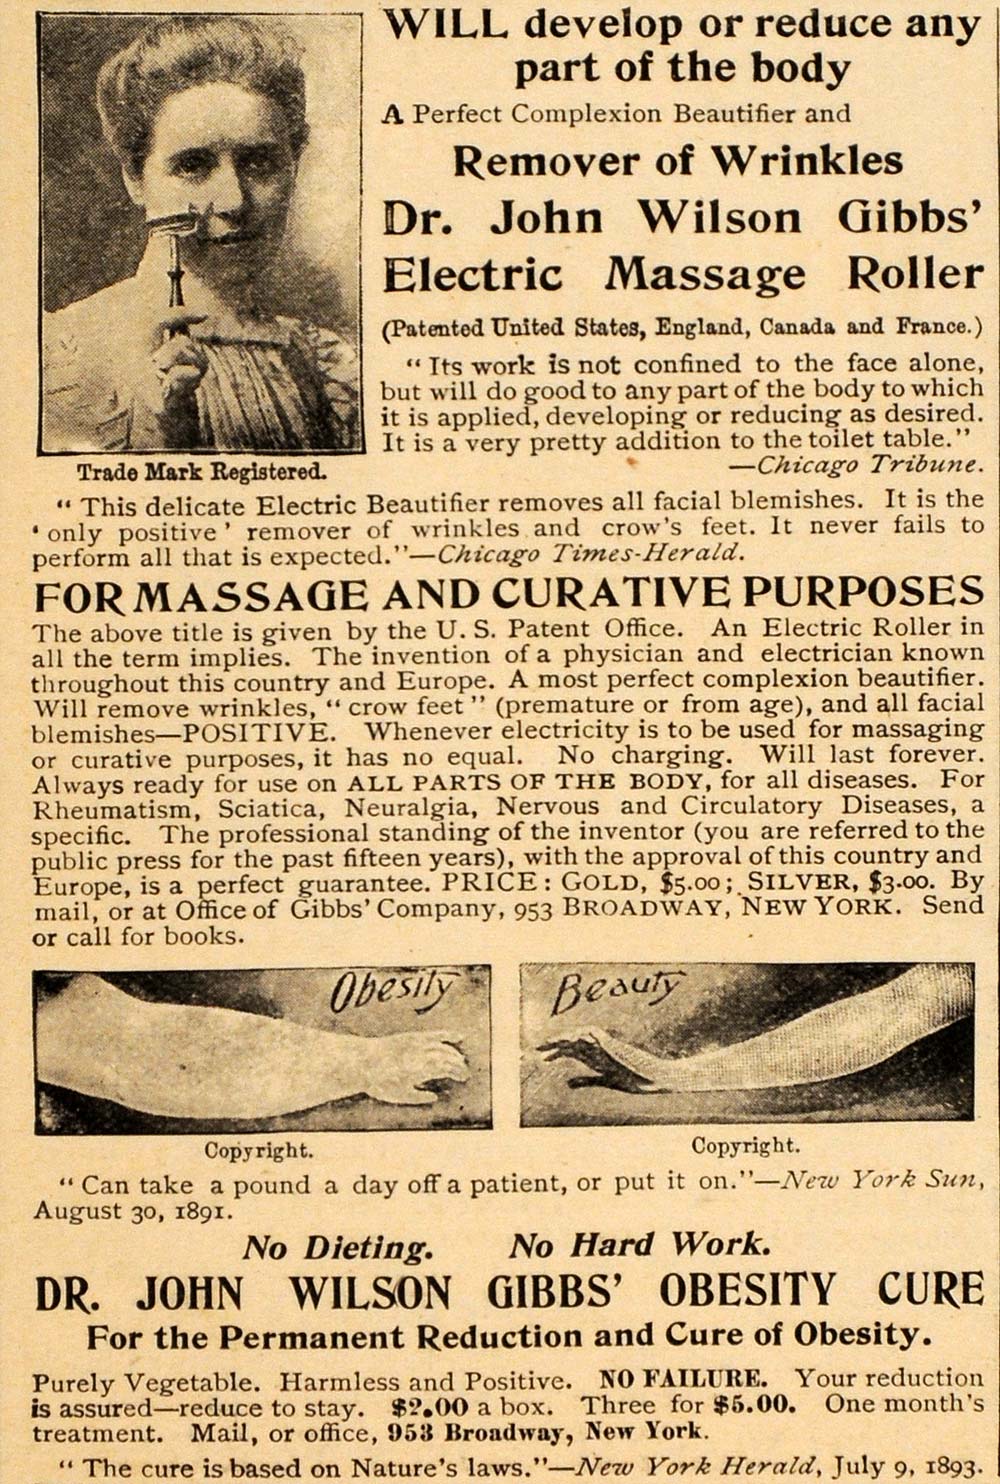 1898 Vintage Ad Massage Roller Obesity Cure Quackery - ORIGINAL OLD4A